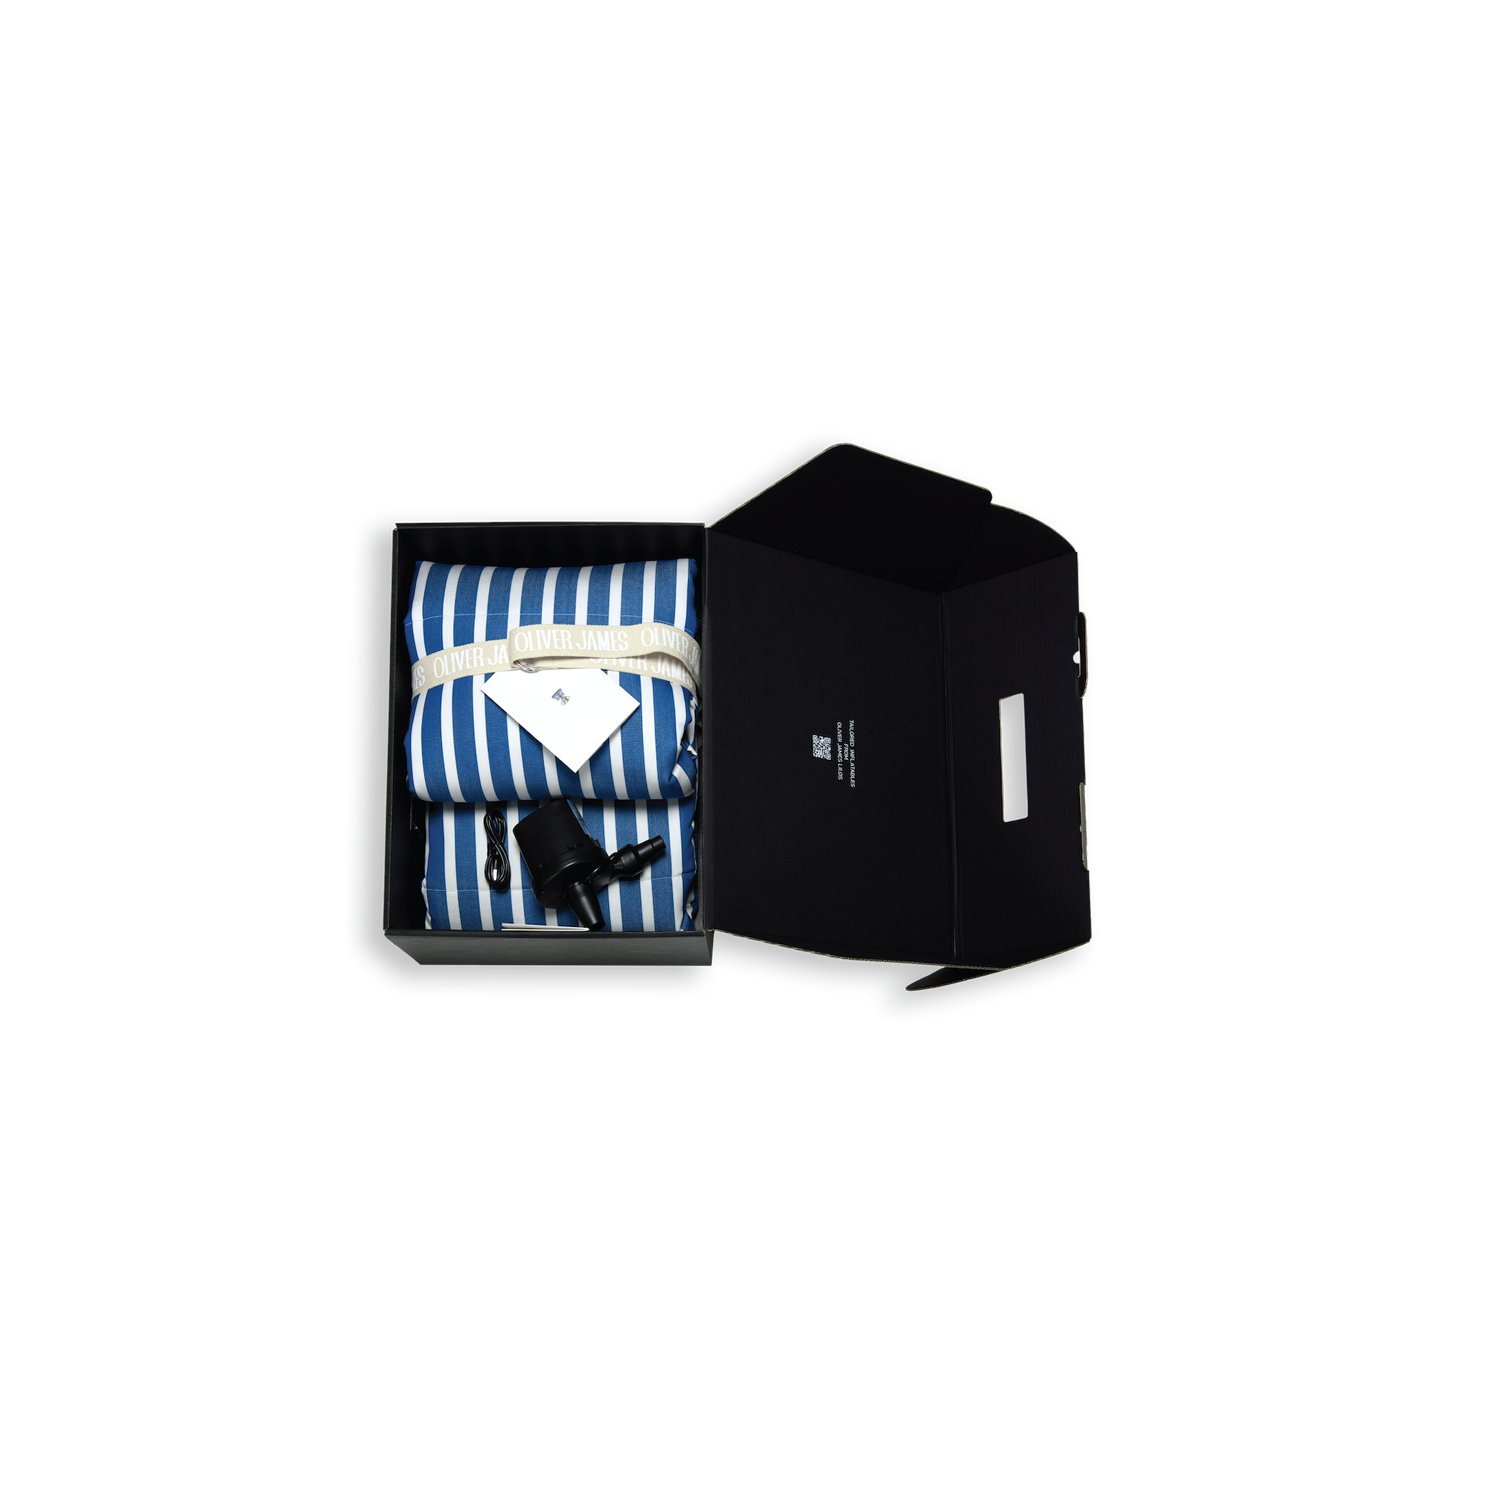 A single blue and white stripe inflatable luxury pool float lounger folded in black box box with a belt, card and pump.